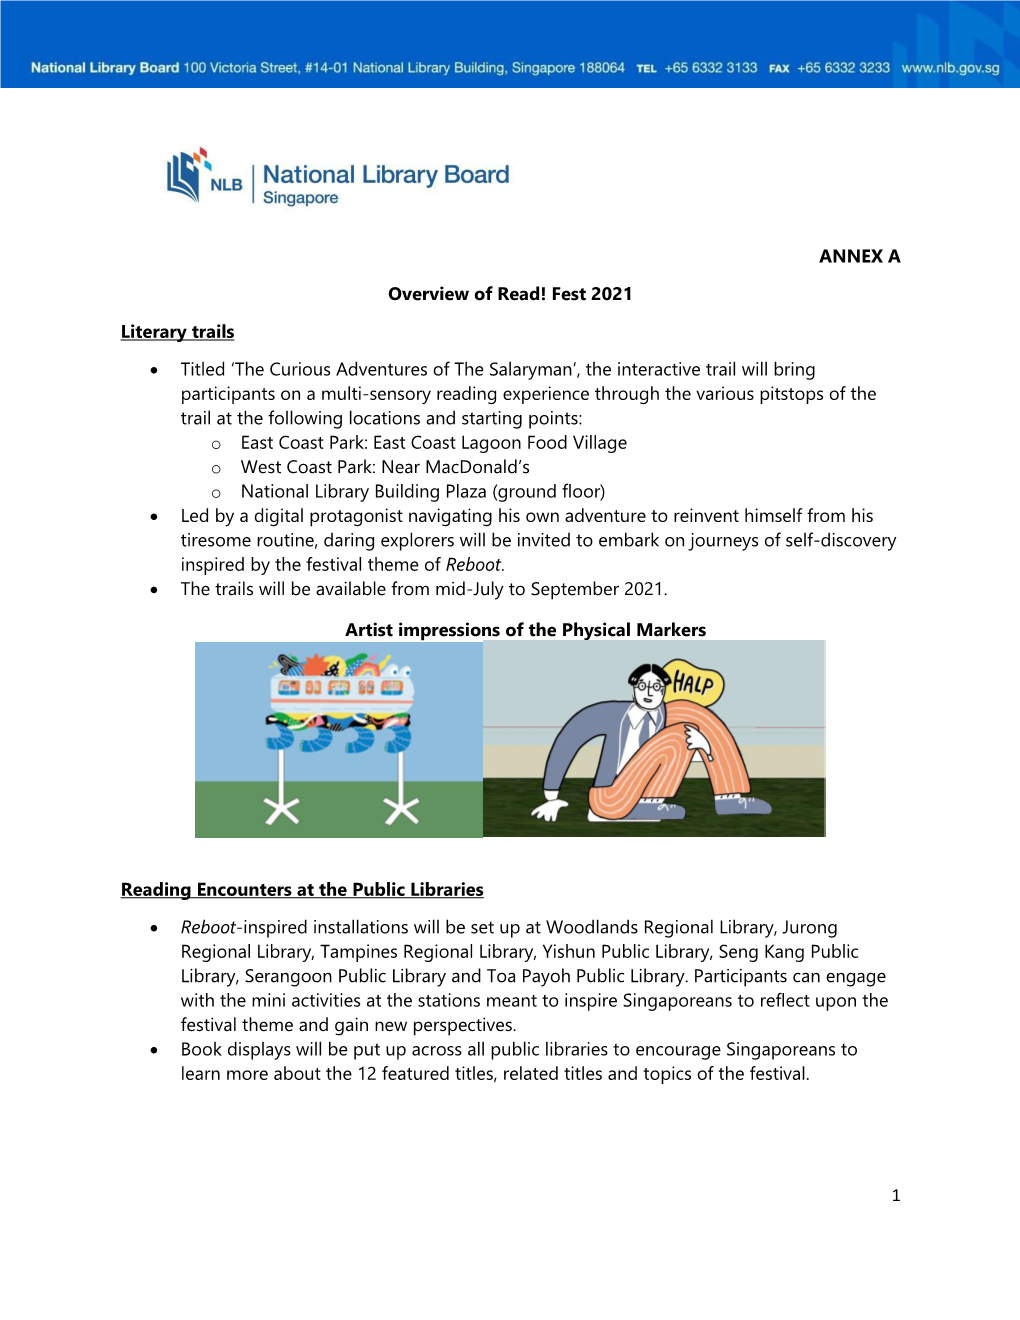 1 ANNEX a Overview of Read! Fest 2021 Literary Trails • Titled 'The Curious Adventures of the Salaryman', the Interactive